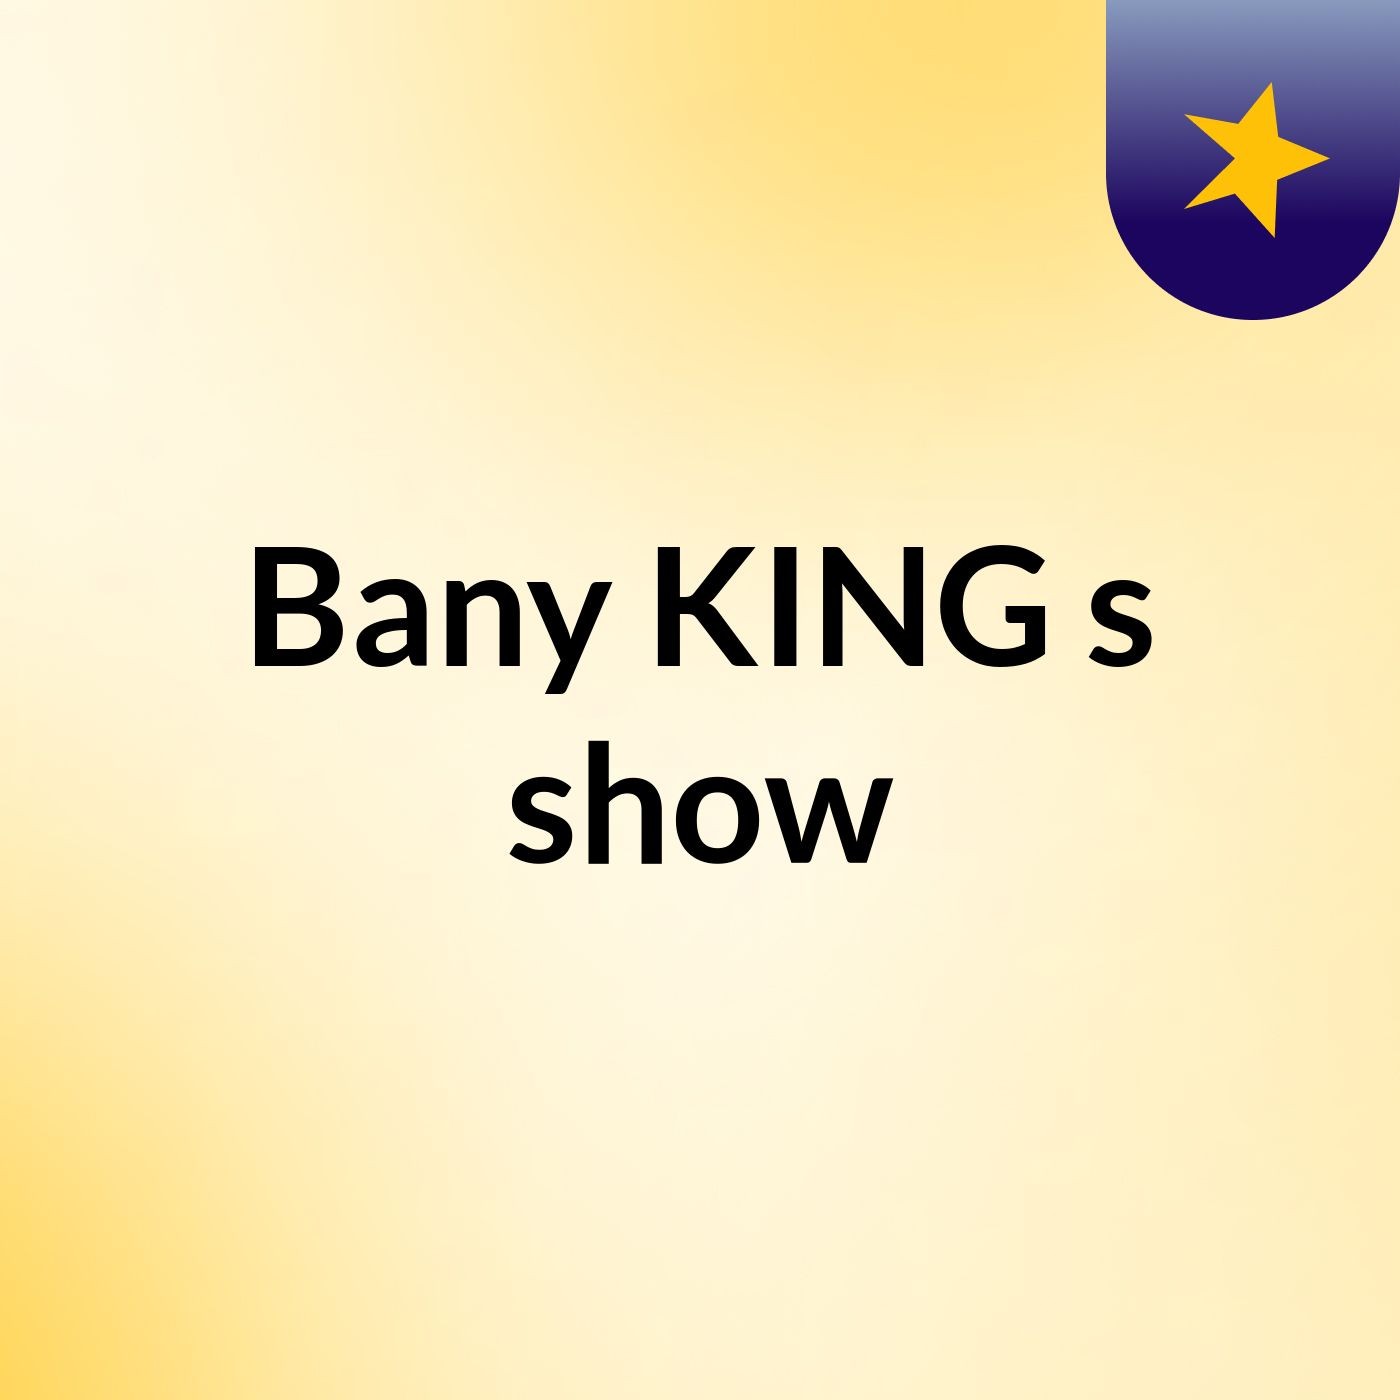 Bany KING's show